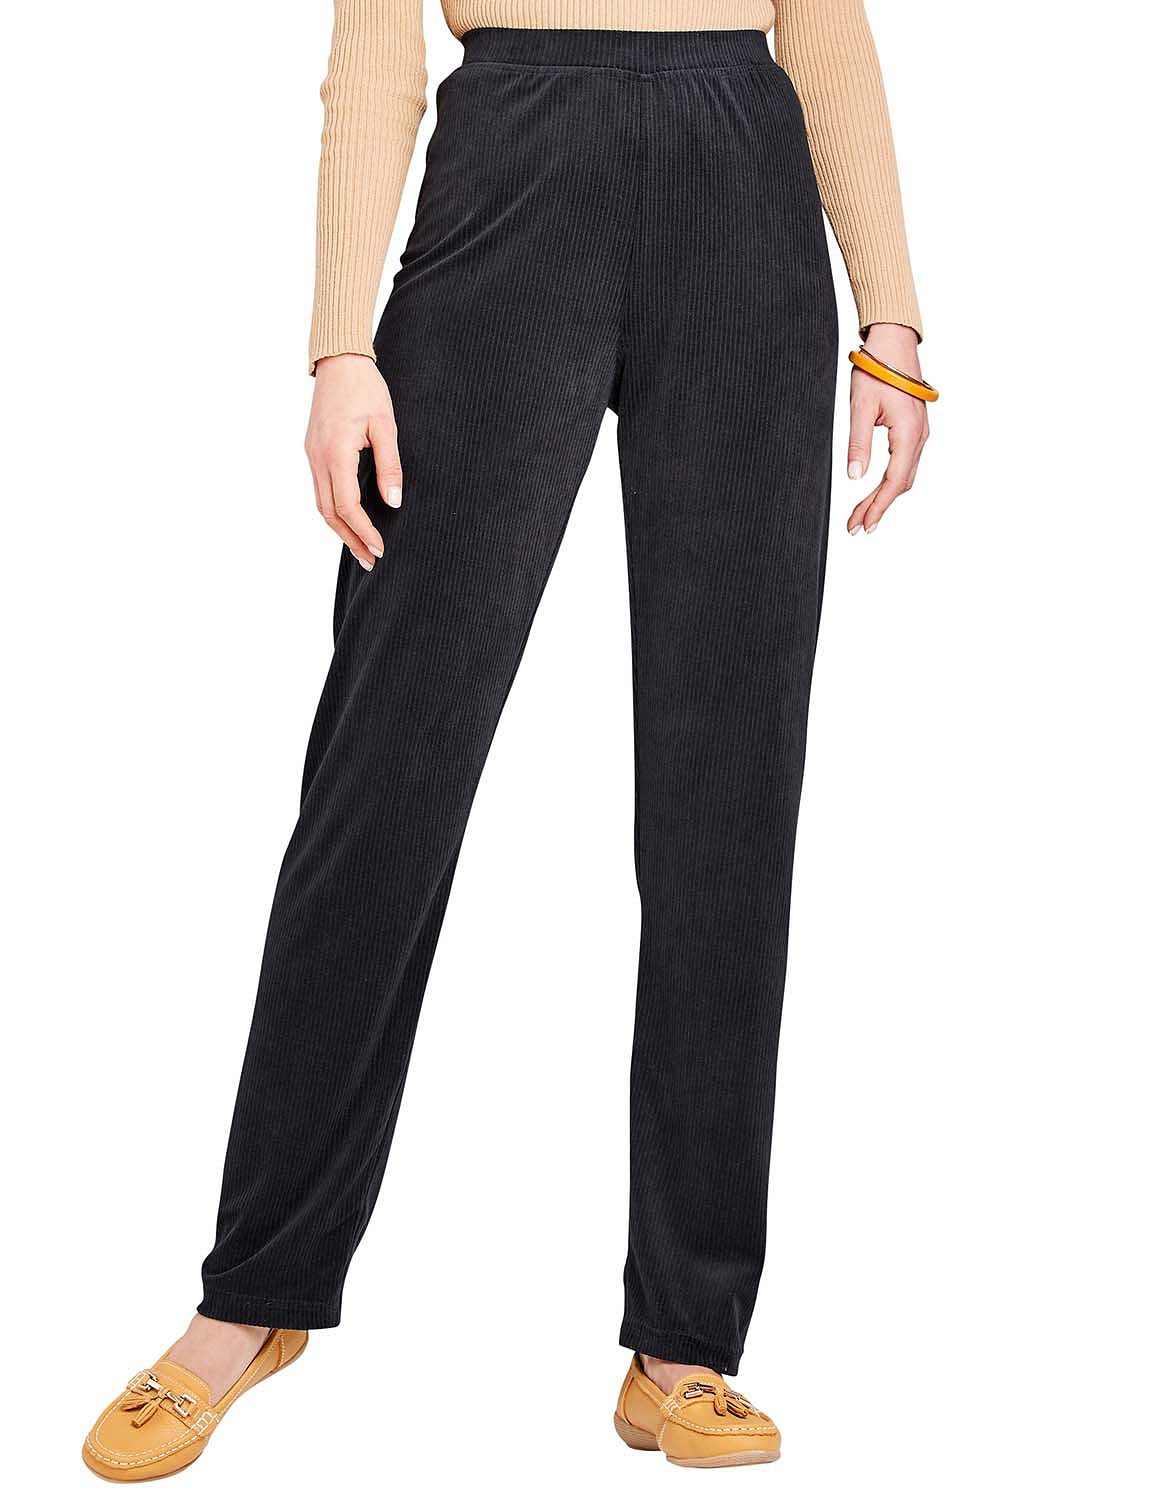 Ladies Cotton Pull On Trousers - Chums